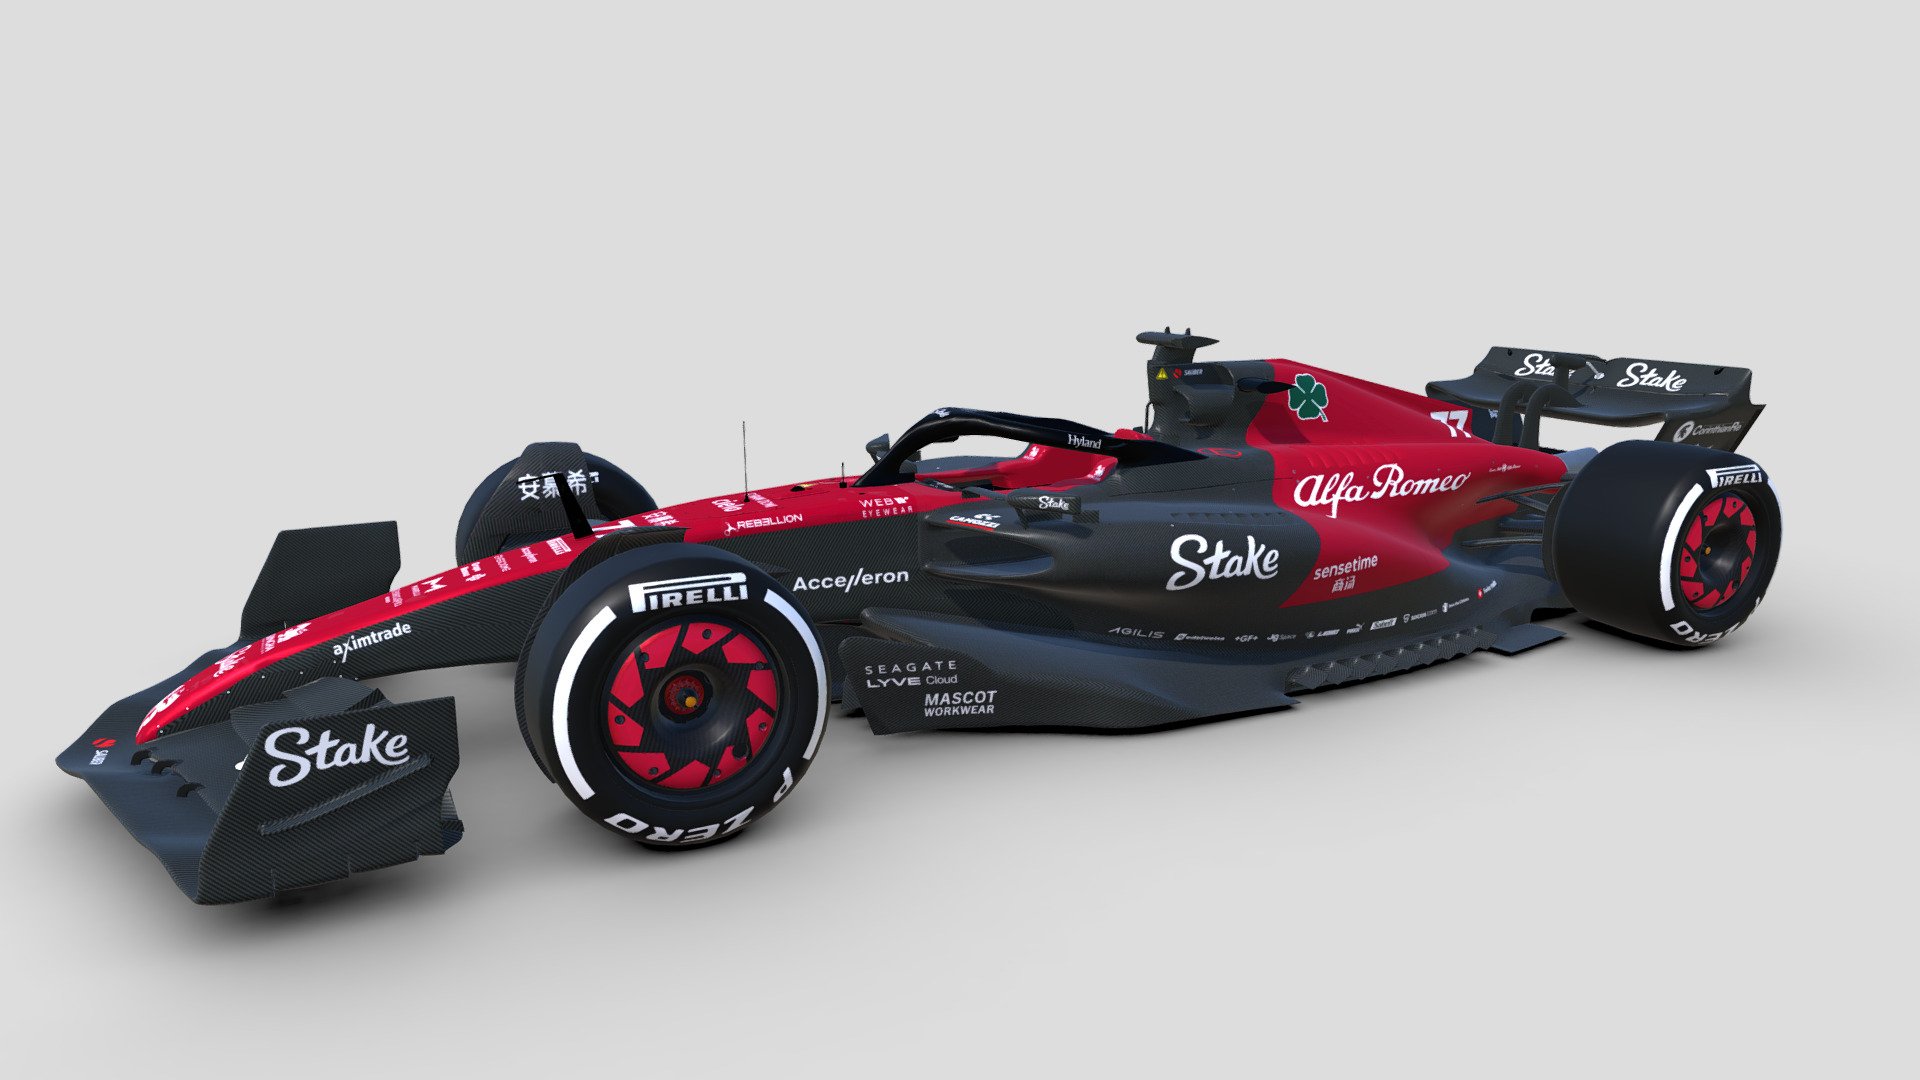 F1 2023 Alfa Romeo Stake C43 
High poly 3D model
Launch livery
Valtteri Bottas - F1 2023 Alfa Romeo Stake C43 - 3D model by Excalibur 3d model